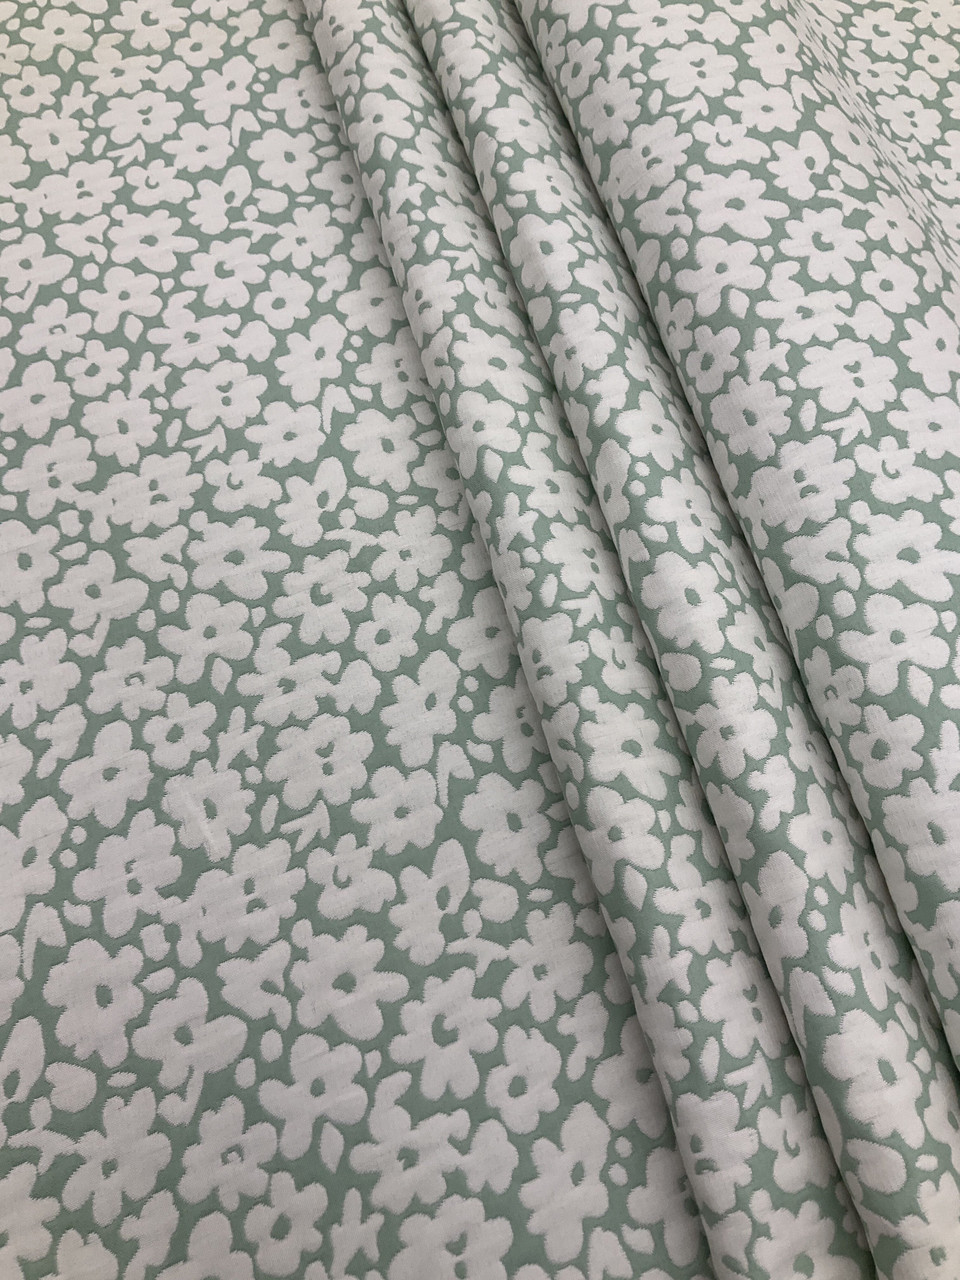 Mint Green and White Floral, Upholstery / Drapery Fabric, 54 Wide